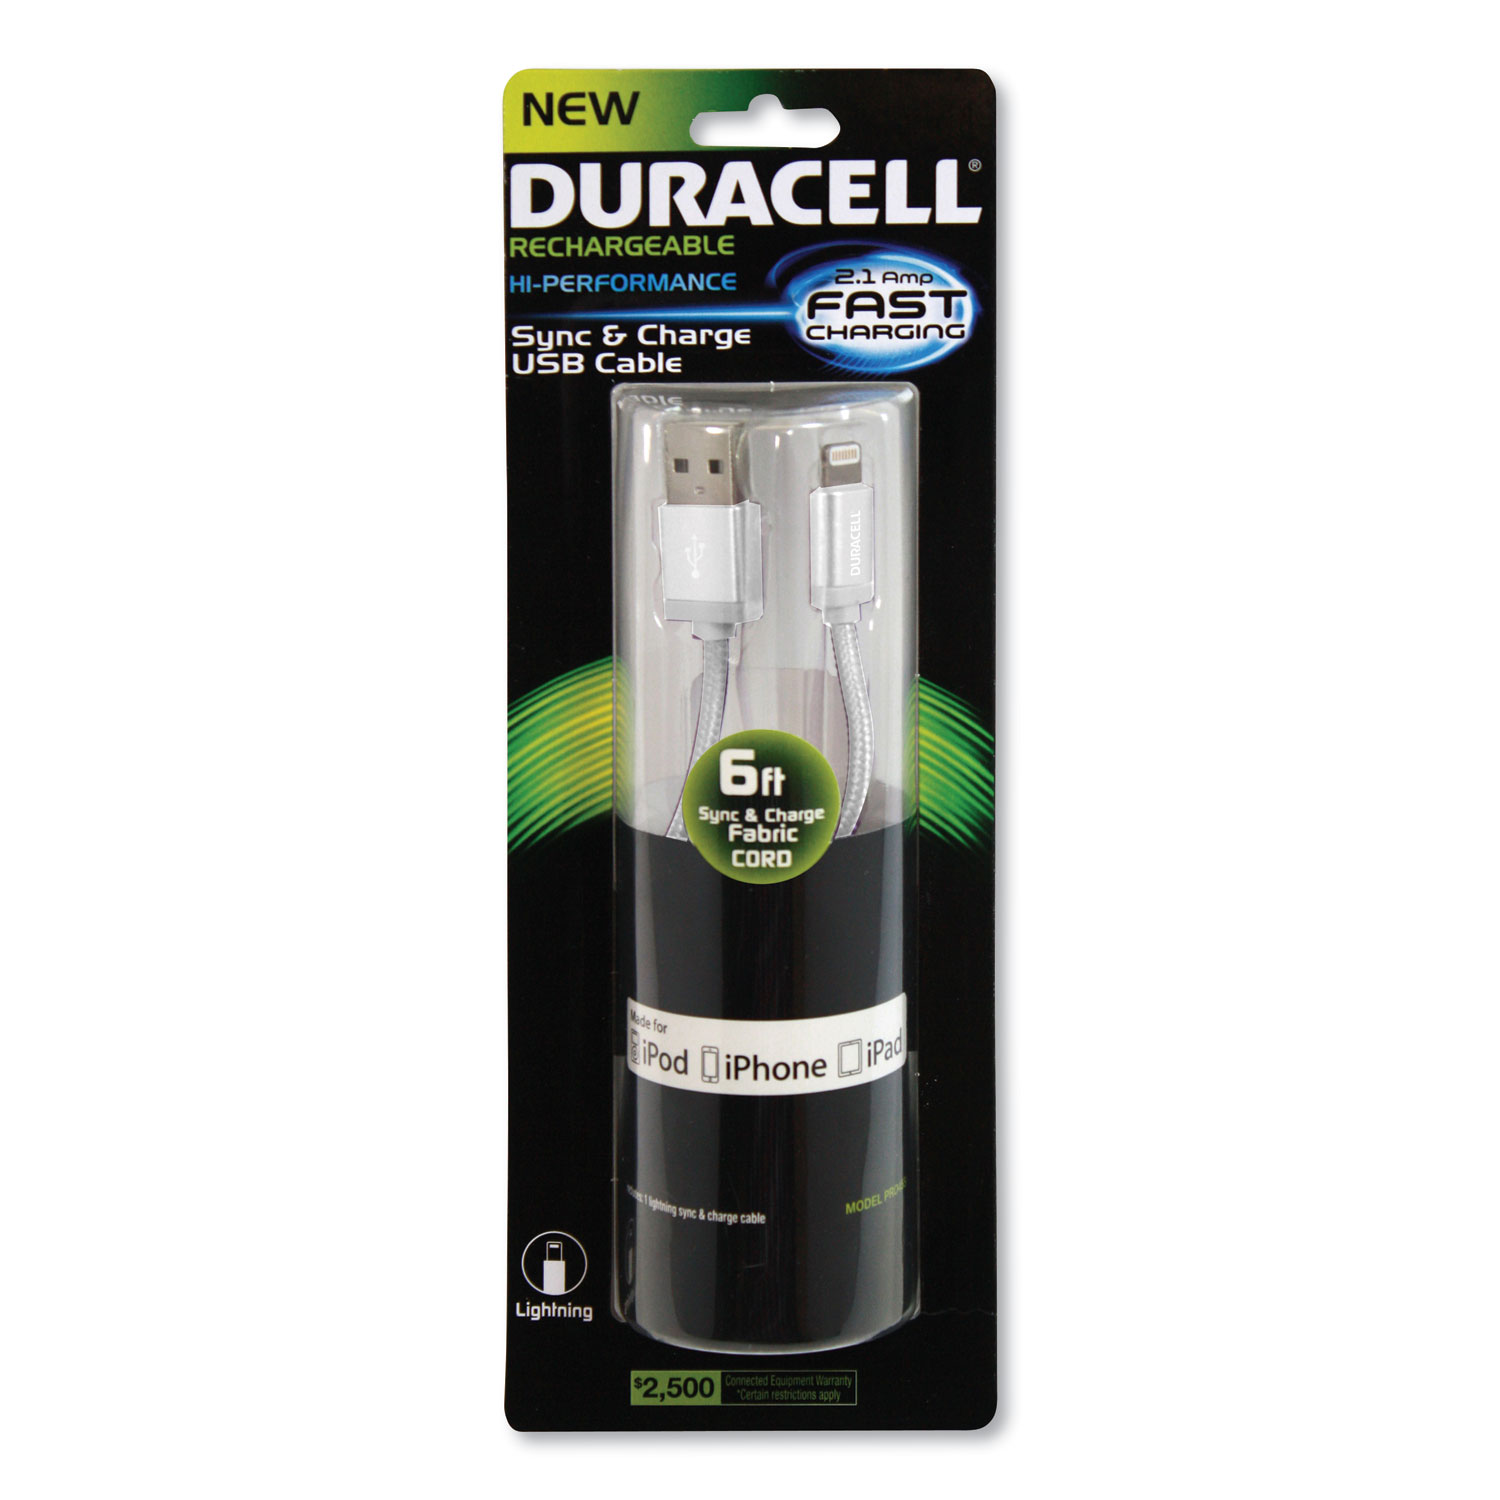  Duracell PRO453 Hi-Performance Sync And Charge Cable for iPad; iPhone; iPod, Apple Lightning, 6 ft, White (ECAPRO453) 